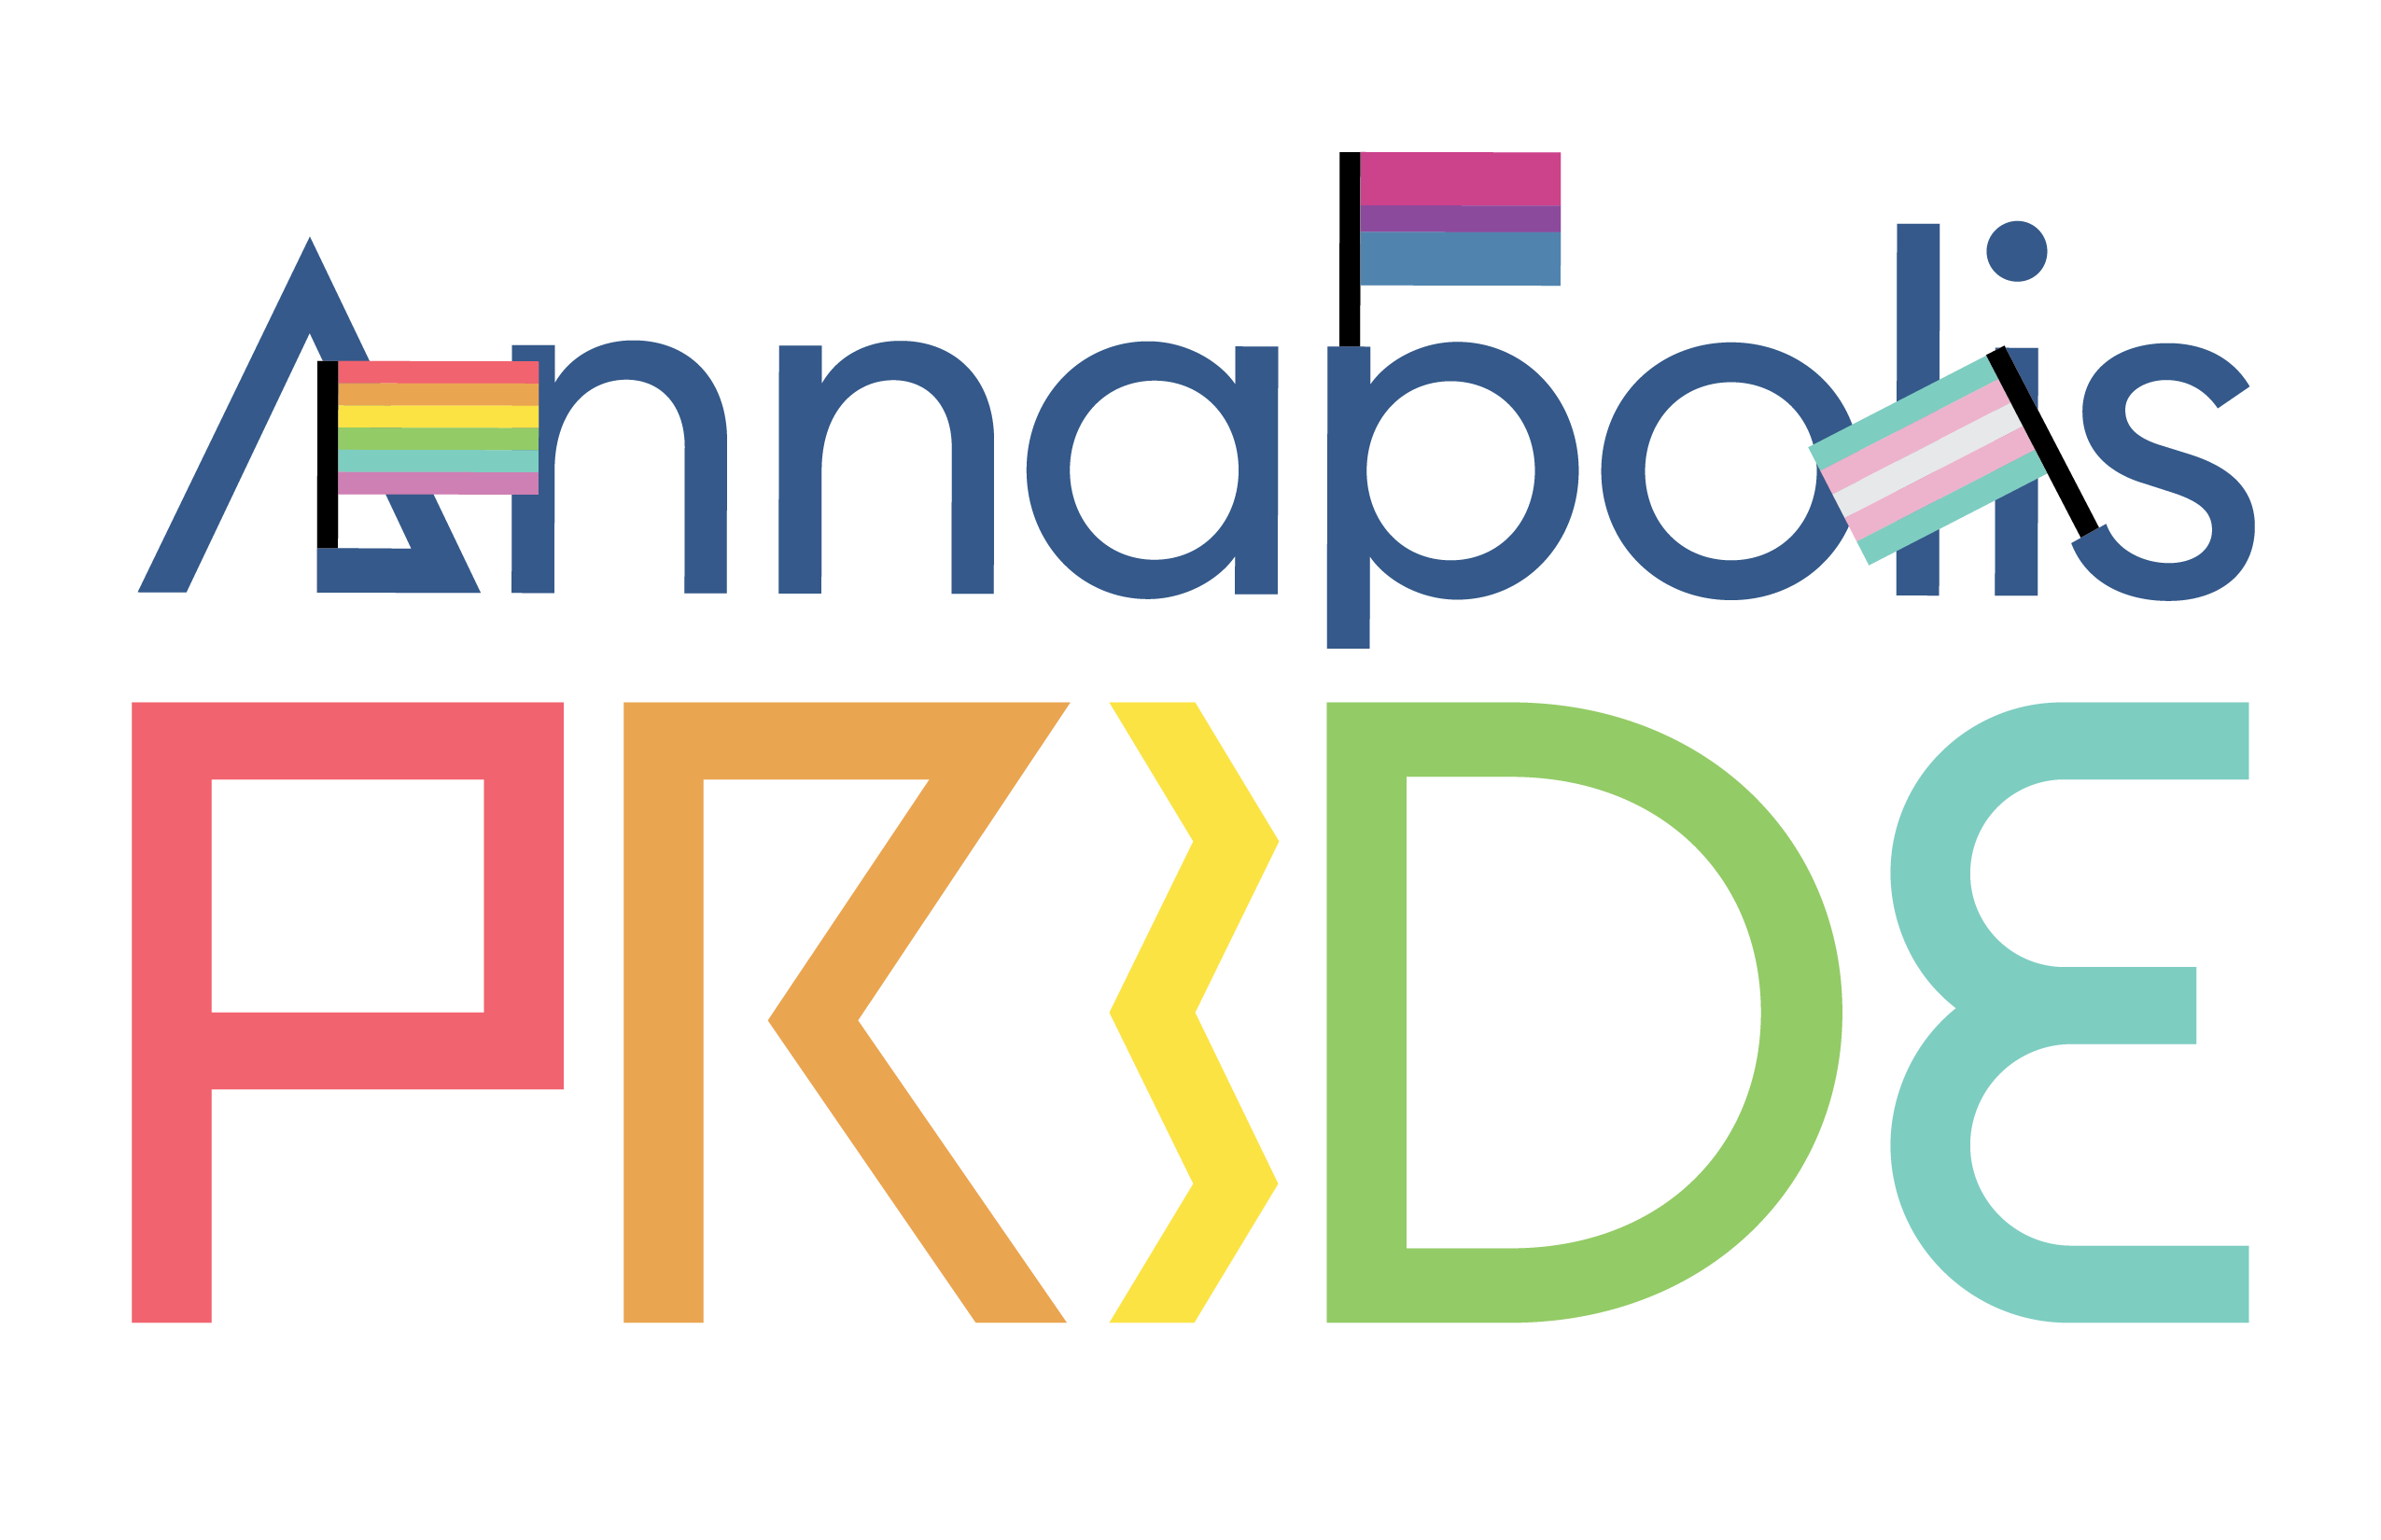 The Annapolis Pride logo, featuring letters with small 'arms' holding tiny pride flags.